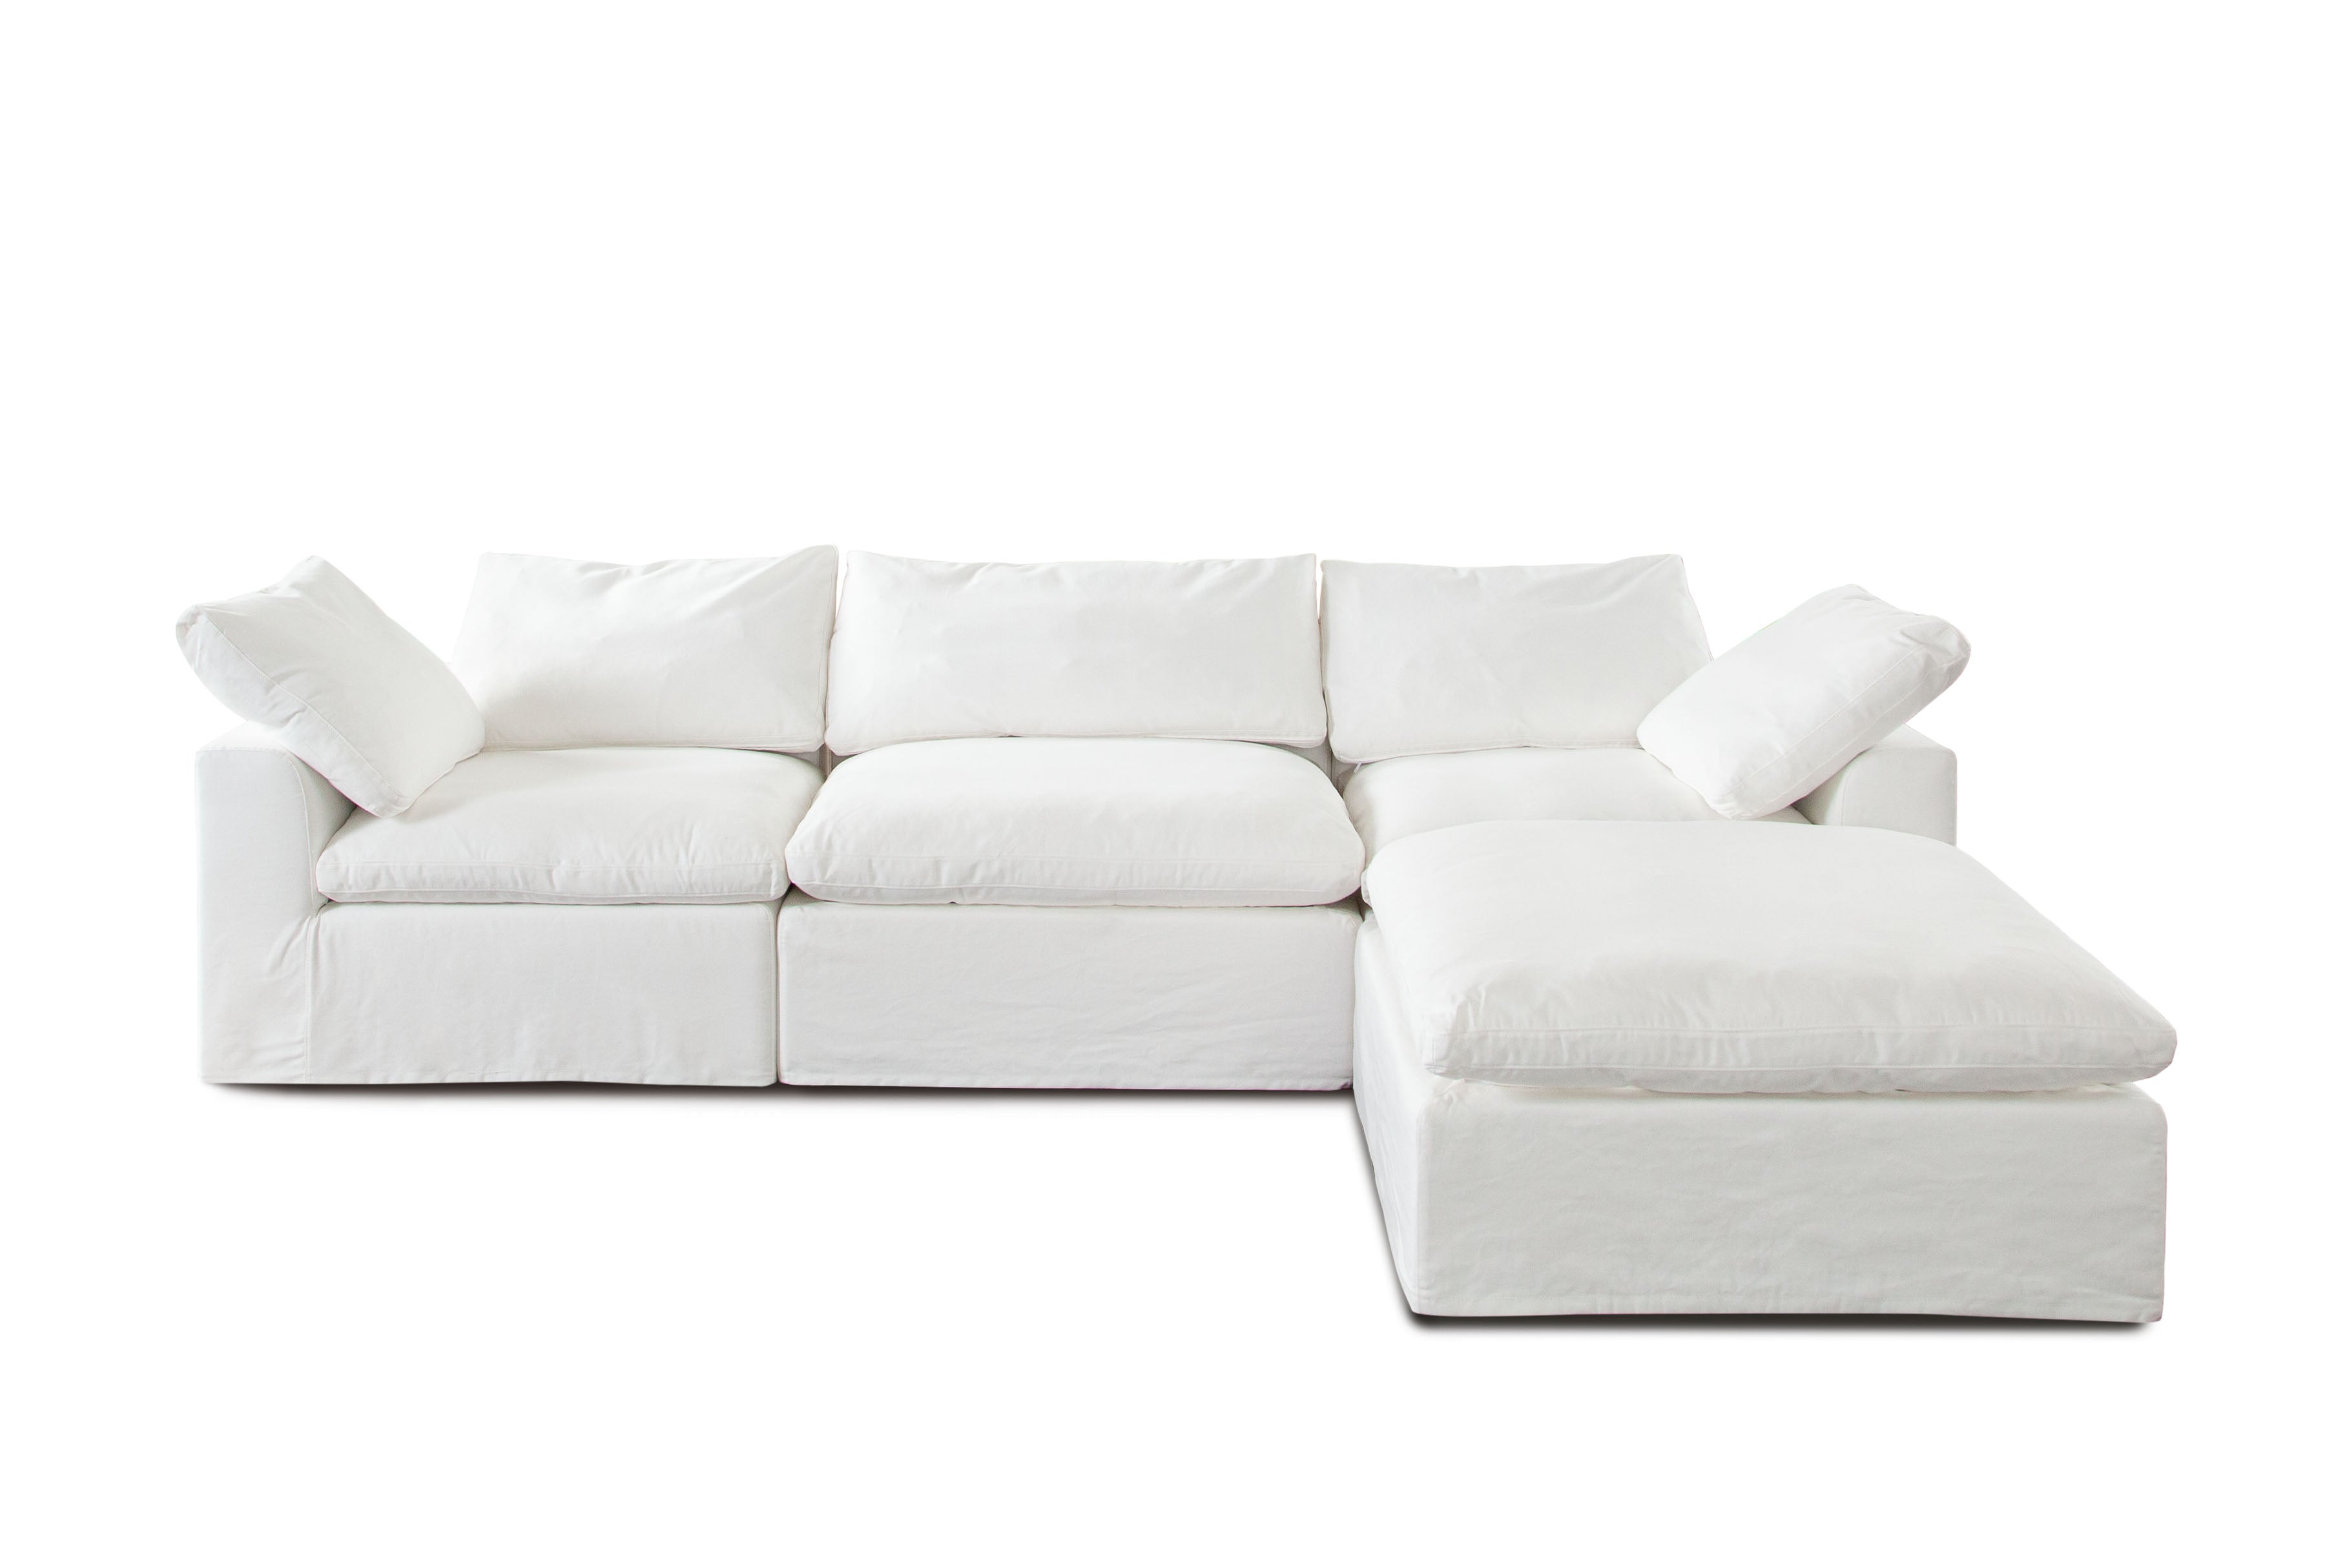 WILLOW 4 PIECE SLIPCOVER SECTIONAL